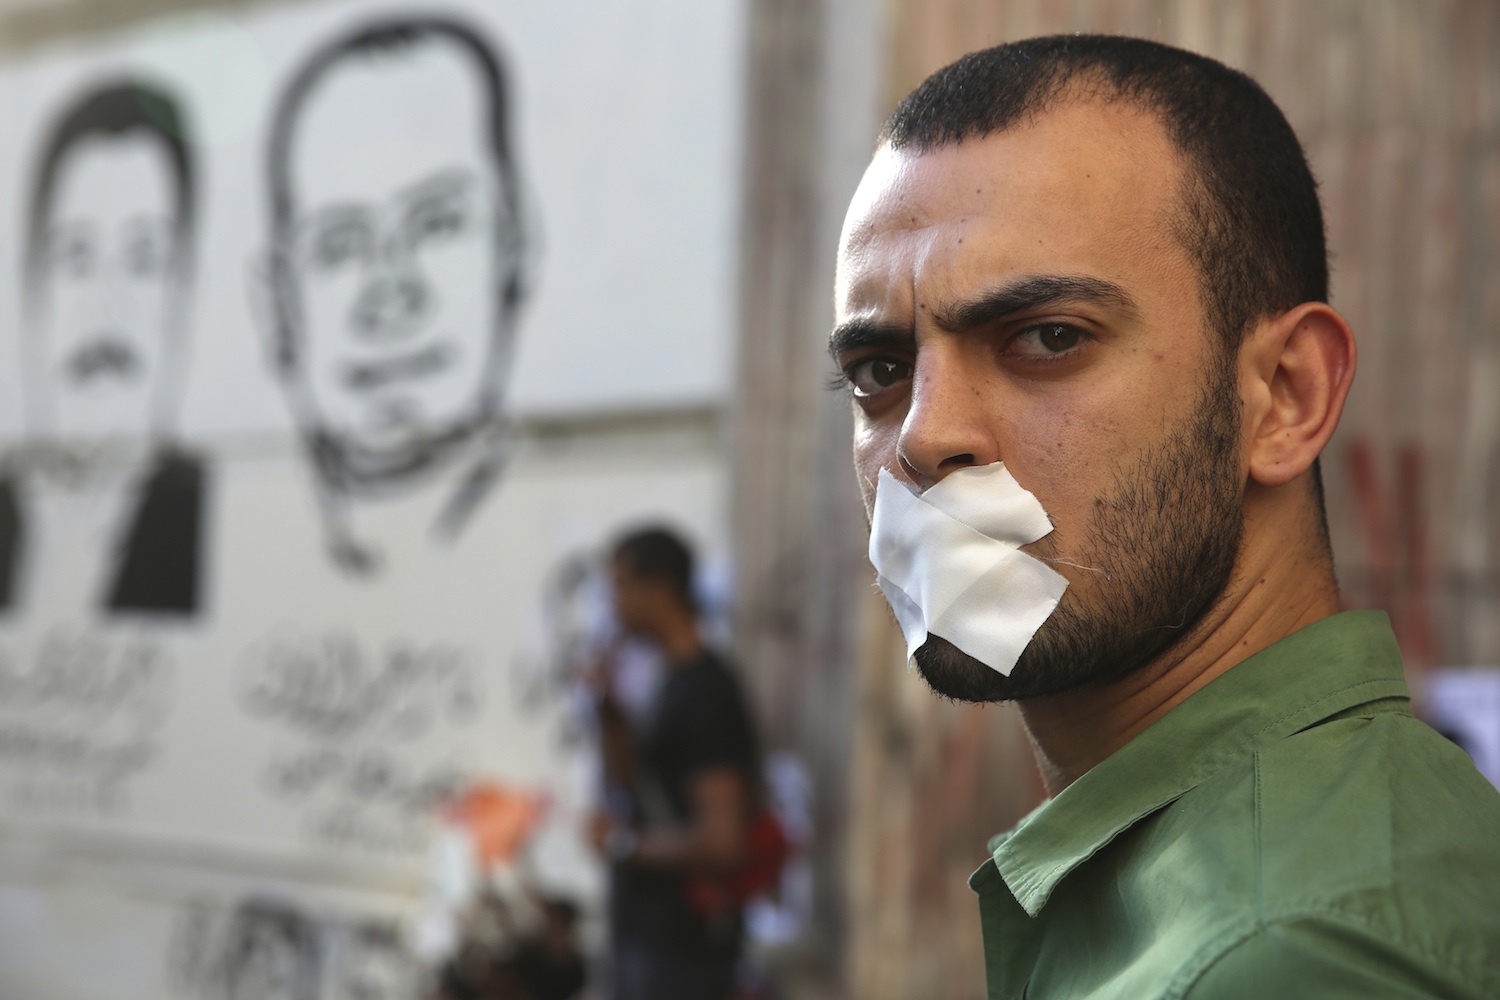 A protester rallies in support of Al Jazeera journalists Abdullah al-Shami and Mohammed Sultan, who were detained by Egyptian authorities, in front of the Press Syndicate in Cairo, June 1, 2014. According to Al Jazeera's website, the two journalists have been in detention since August last year for providing information to the Muslim Brotherhood. The government has declared the Brotherhood a "terrorist group". The Brotherhood says it is a peaceful organisation. REUTERS/Mohamed Abd El Ghany (EGYPT - Tags: POLITICS CIVIL UNREST) - RTR3RQ5B